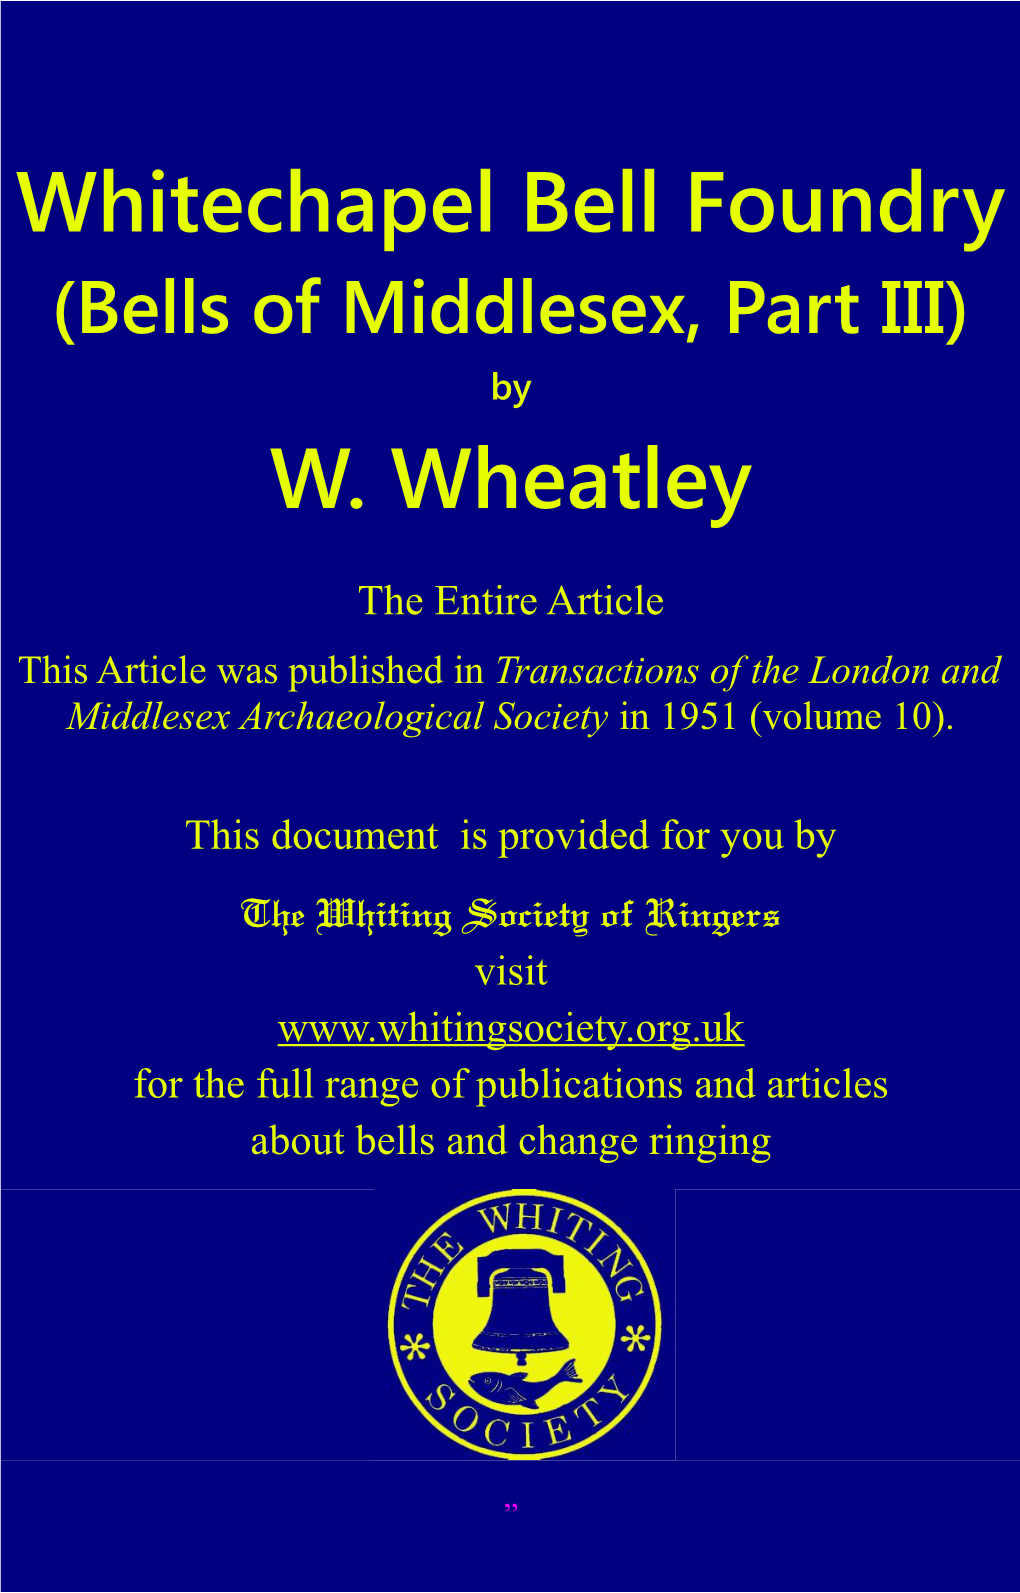 Whitechapel Bell Foundry (Bells of Middlesex, Part III) by W